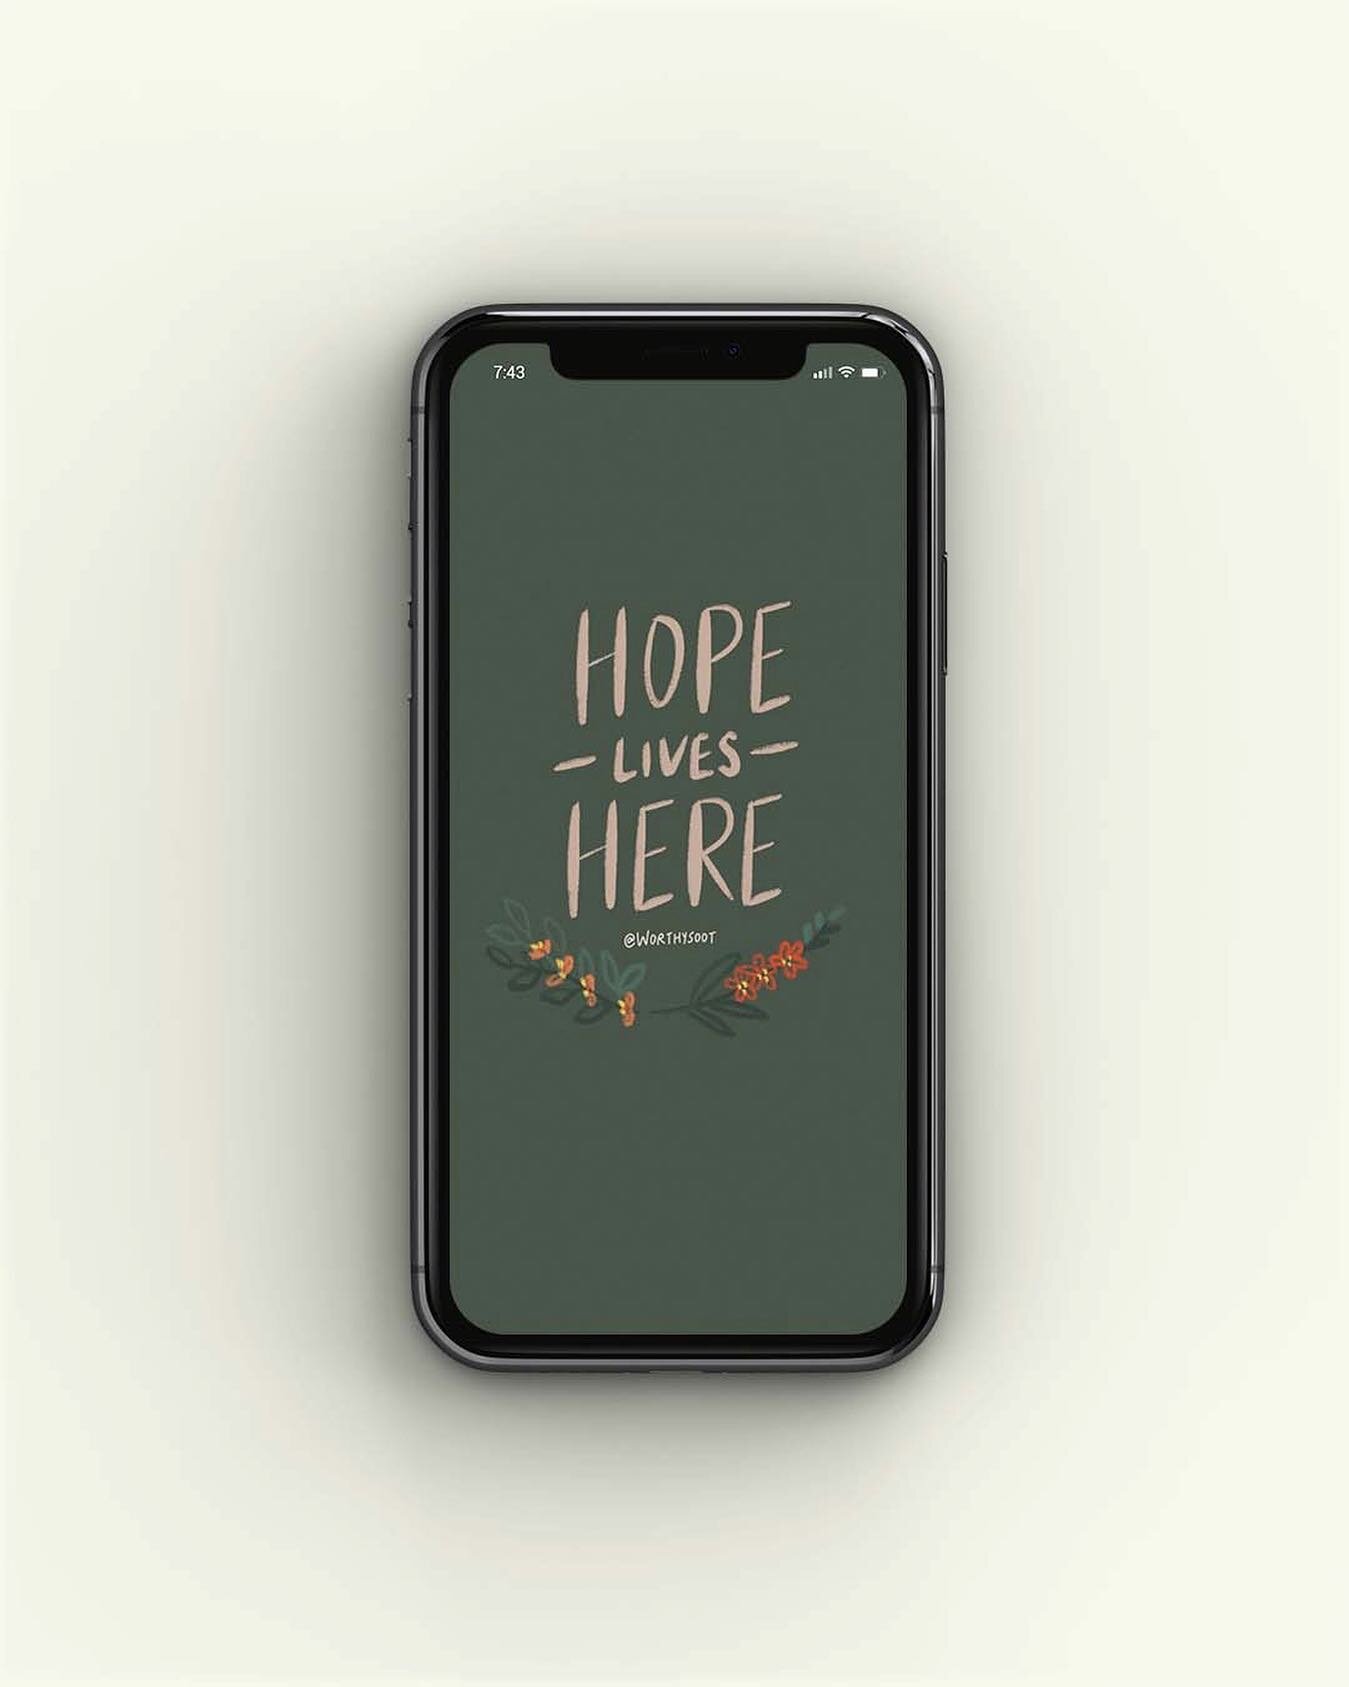 Hope lives here.

In the doubts.
In the stress.
In the anxiety.
In the depression.
In the loss.
In the heartache.
In the diagnosis.
In the sin confession.

Hope lives here because Jesus never leaves. And where Jesus is, hope remains.

You don&rsquo;t